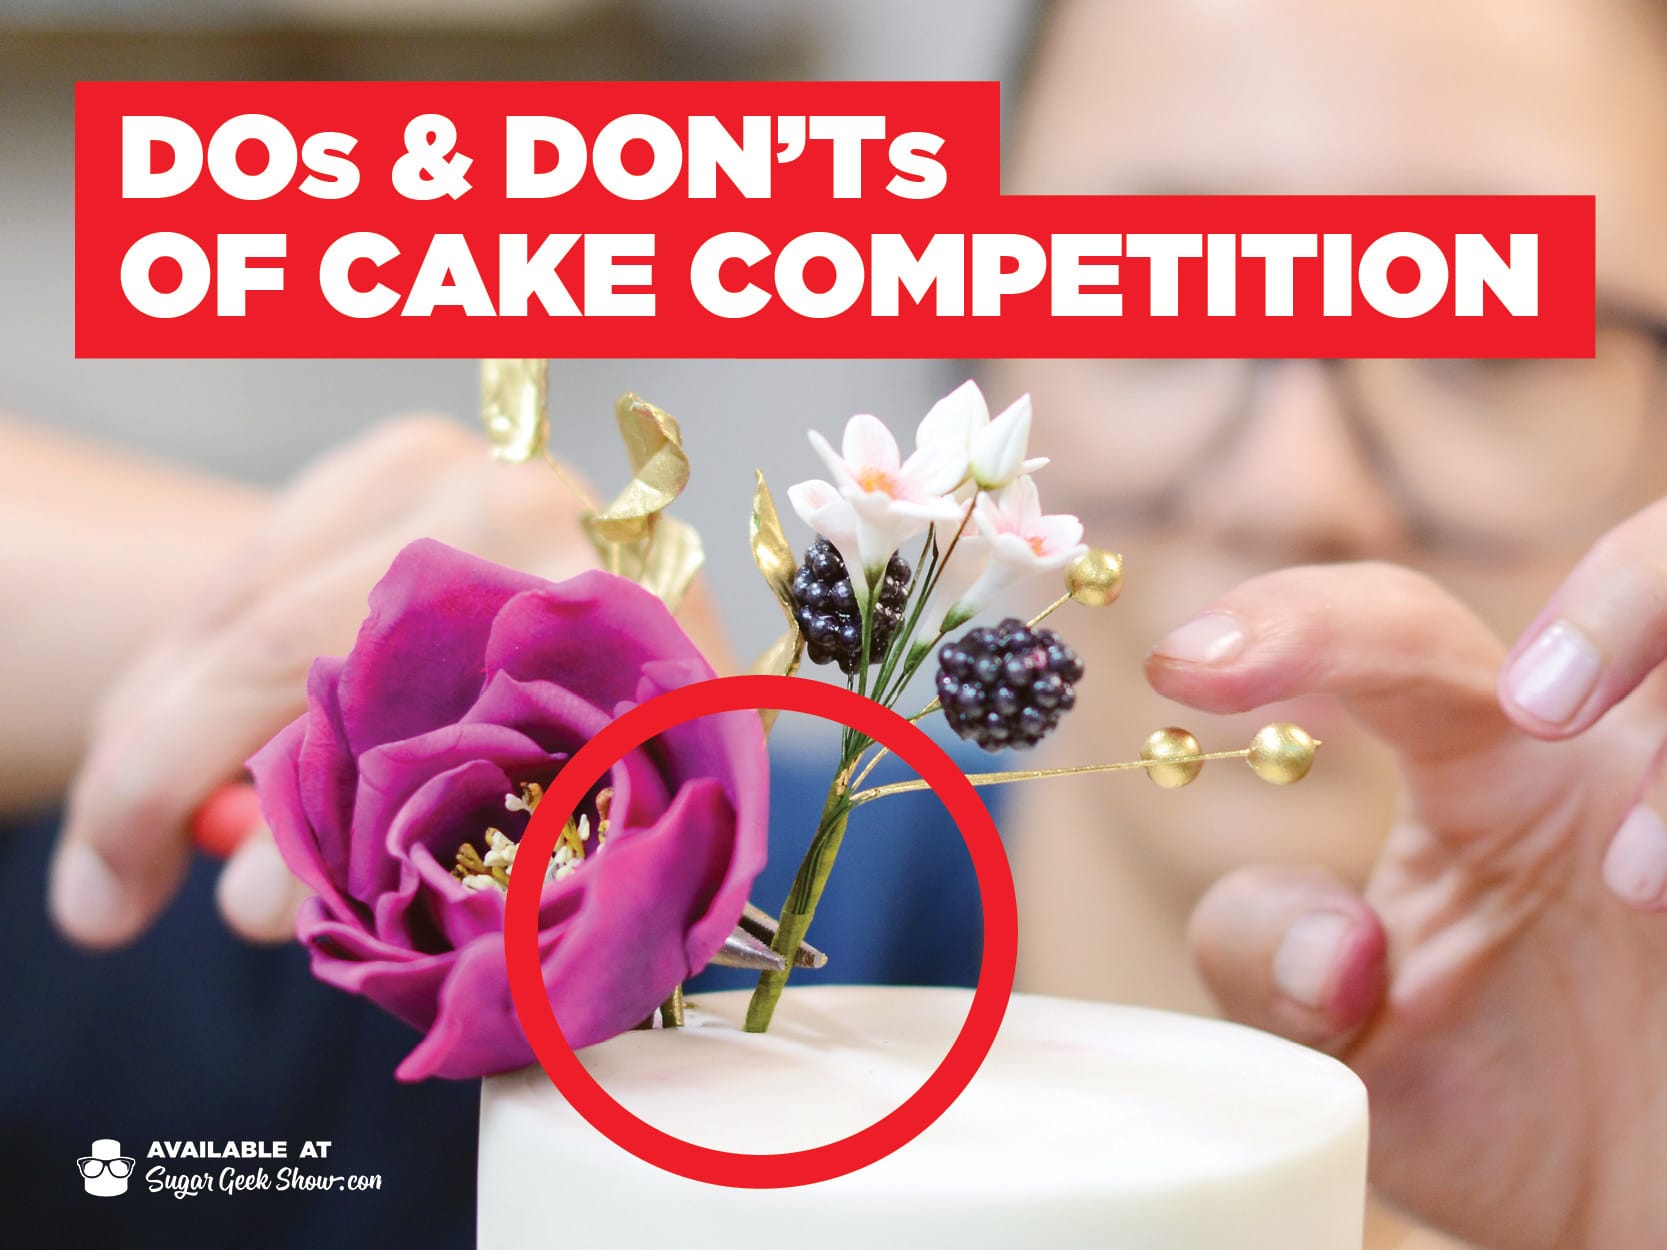 The Dos and Don'ts of Cake Competition